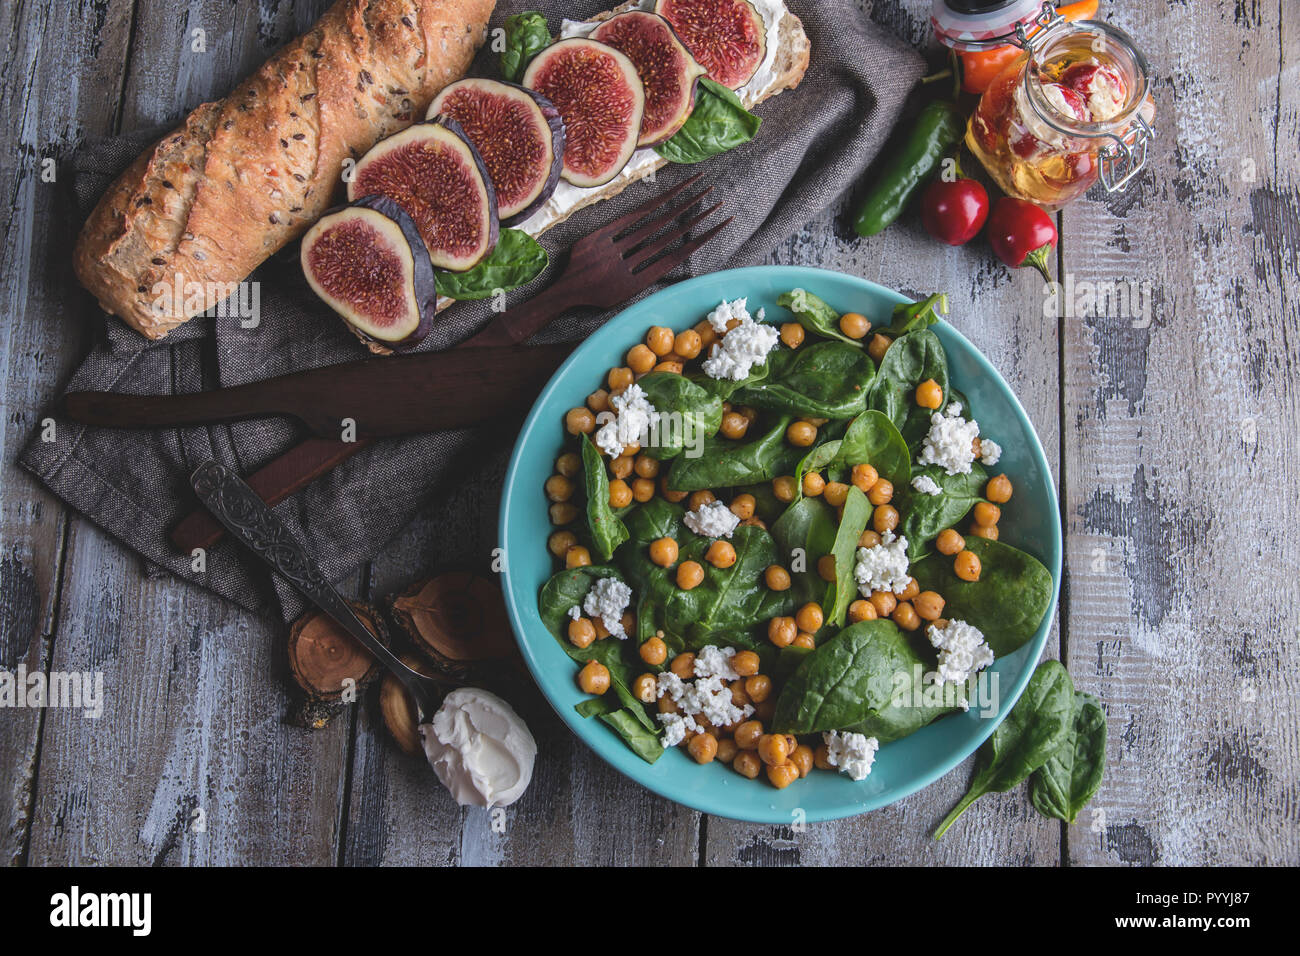 Chickpeas and veggies salad with spinach leaves, homemade cheese,healthy vegan food,sandwich with figs, diet dish Stock Photo